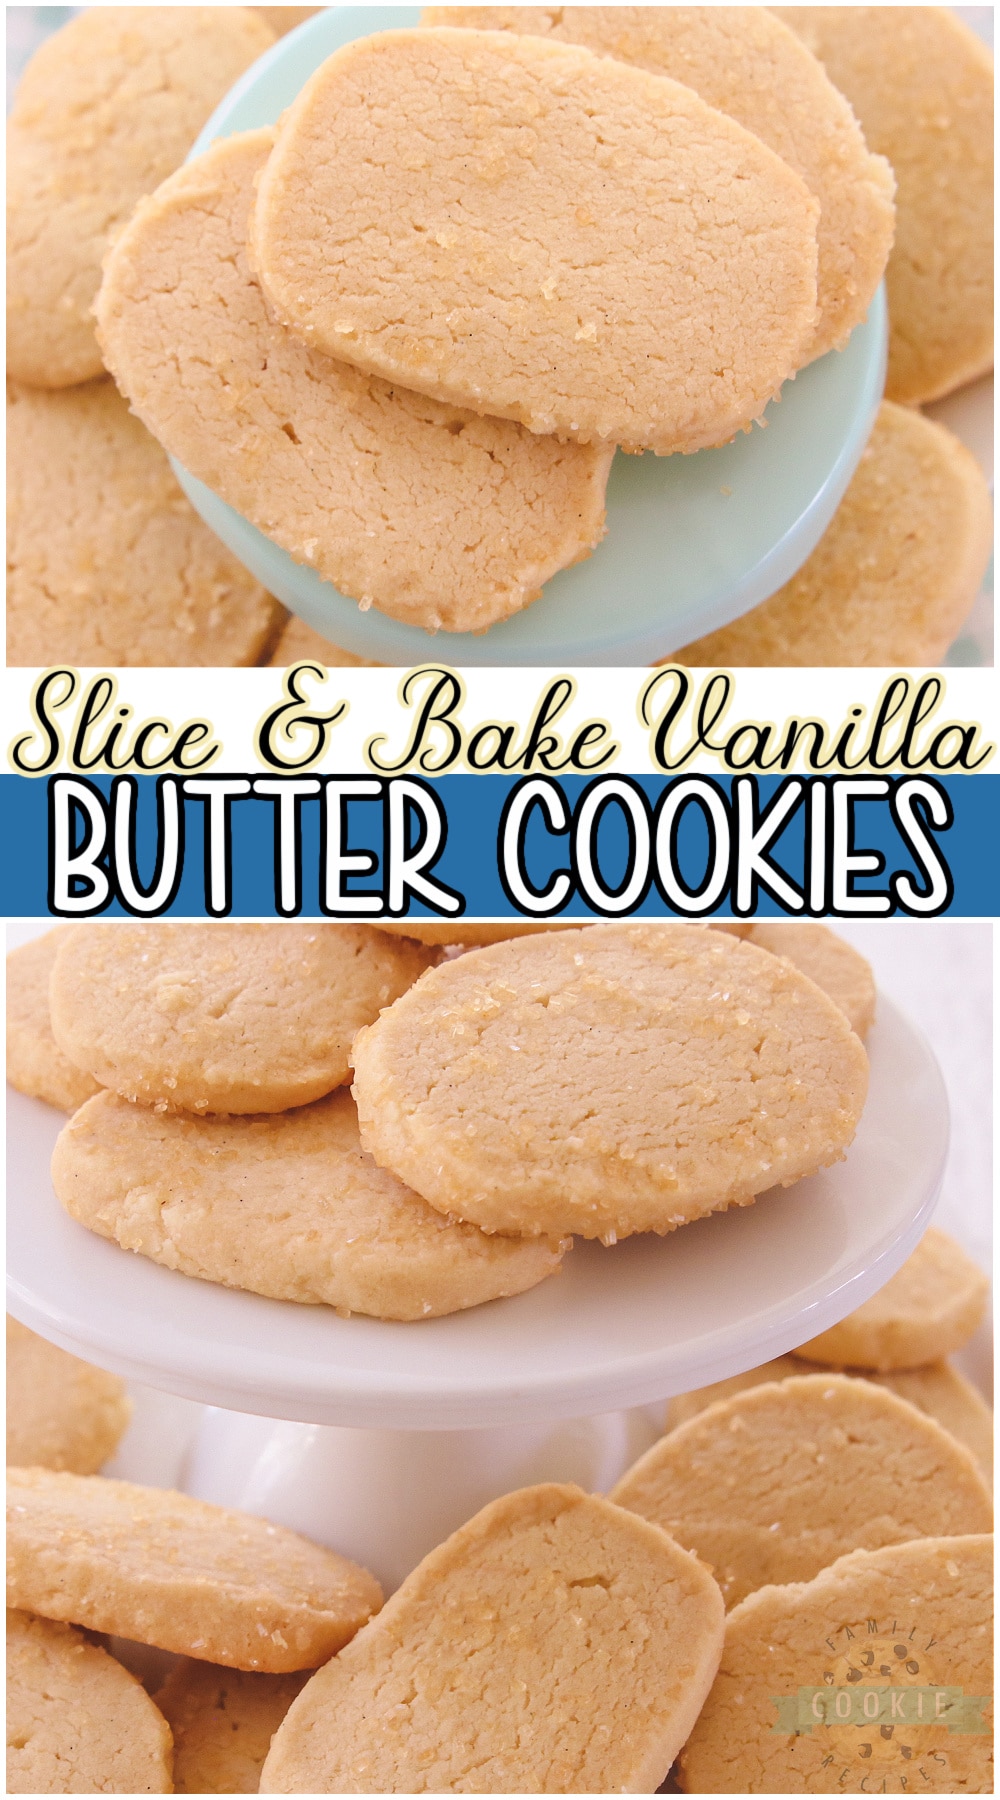 Slice & Bake Vanilla Butter cookies are a wonderful buttery shortbread cookie packed with delicious vanilla flavor. Simple to make with few ingredients, butter cookies are a favorite! 